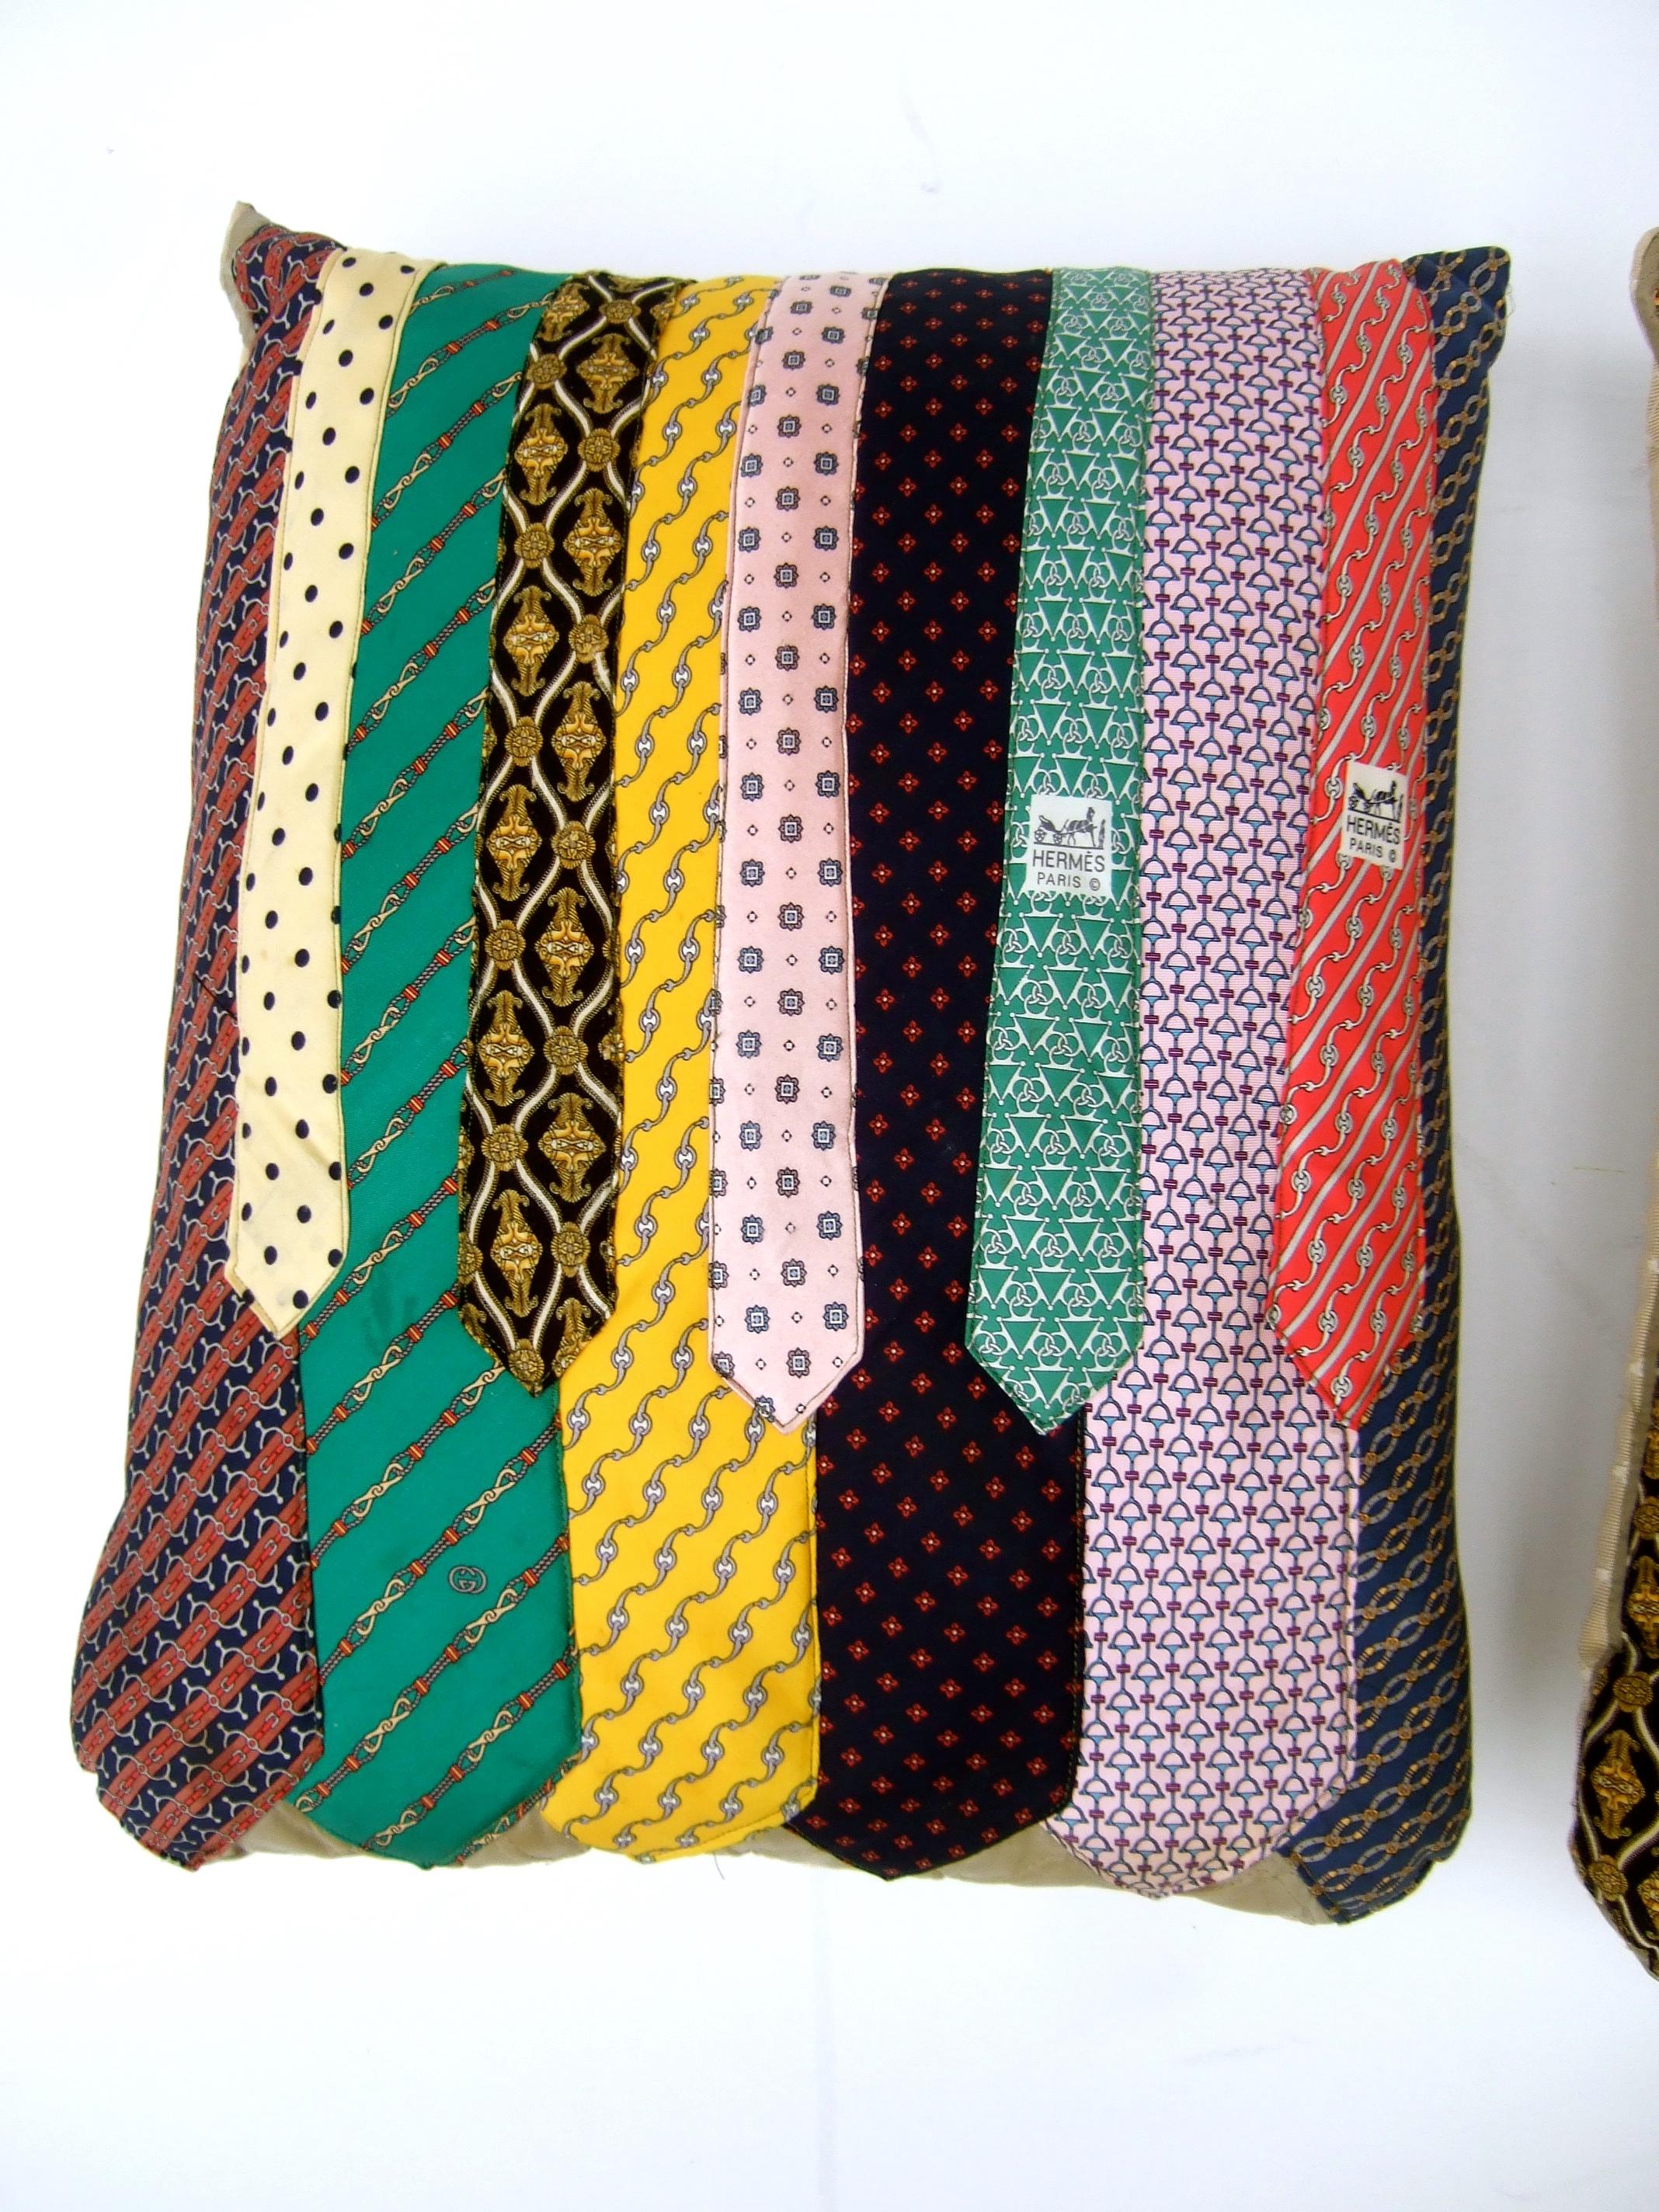 Pair of Vintage Hermes & Gucci Silk Necktie Up-cycled Handmade Pillows c 1980s  For Sale 4